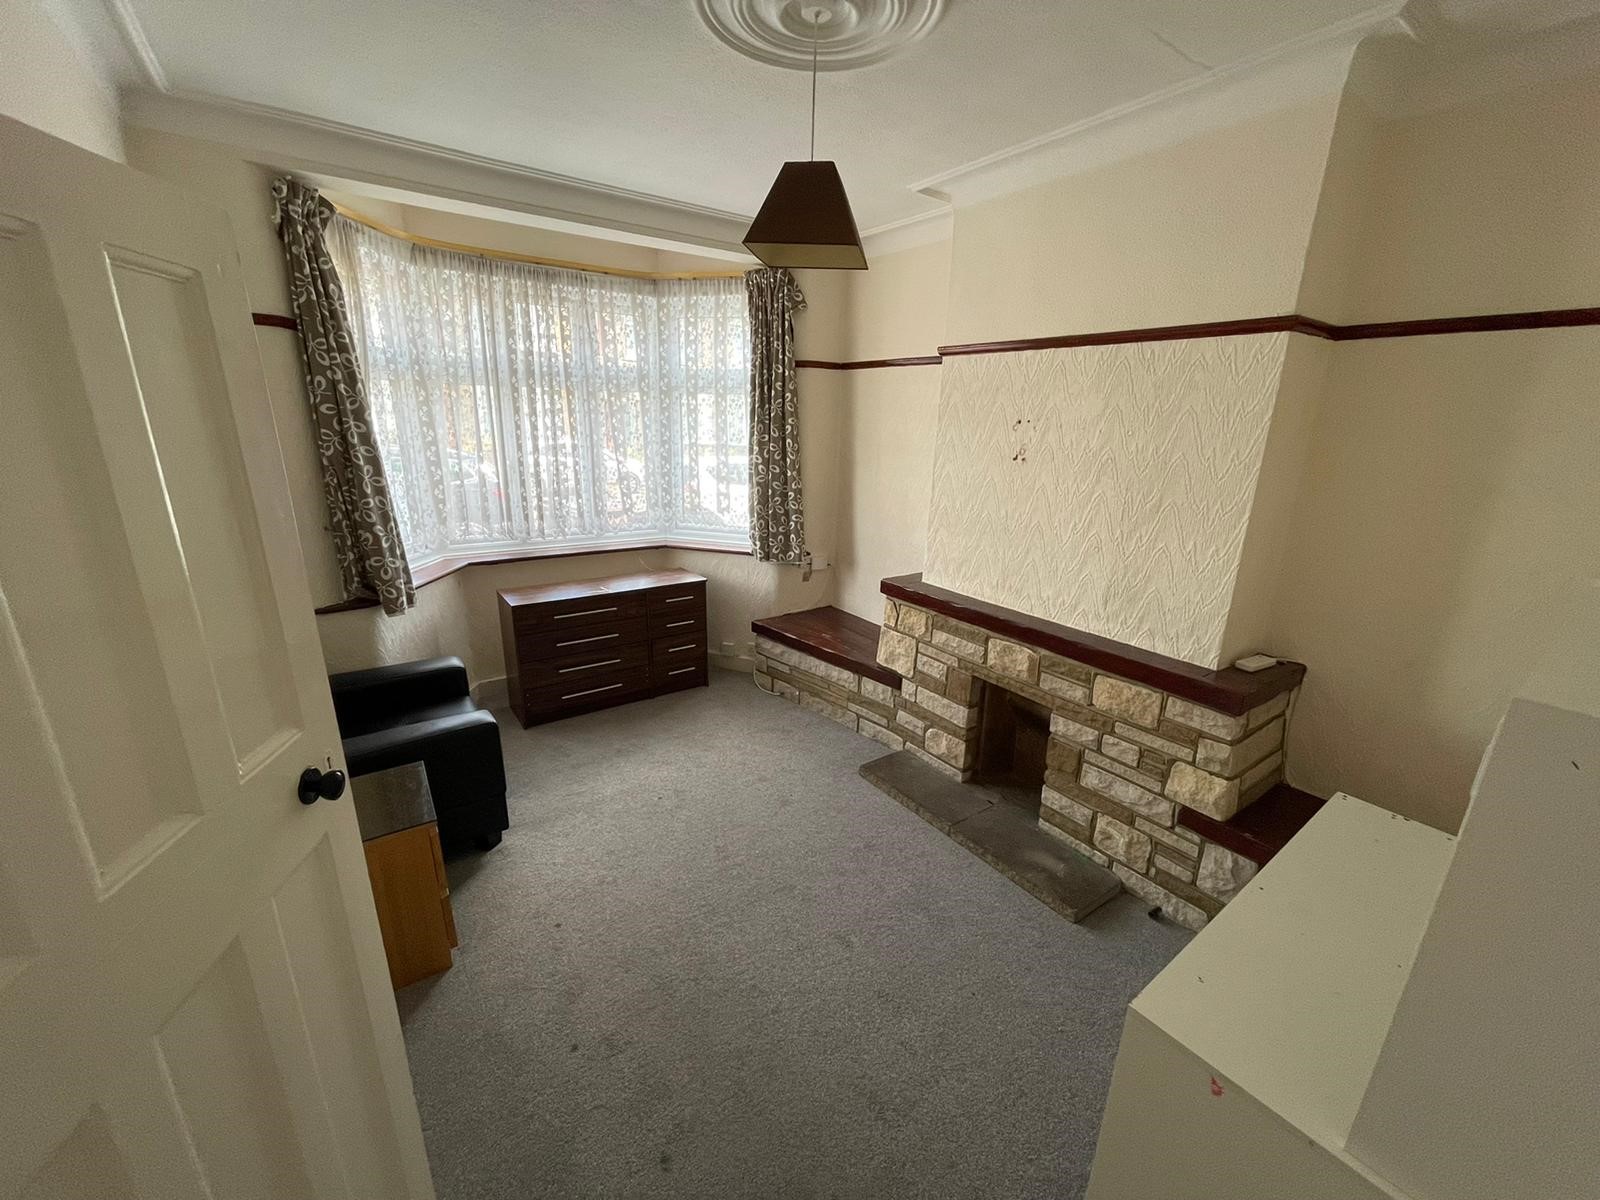 3 bed Mid Terraced House for rent in Ilford. From Movesmart - Ilford